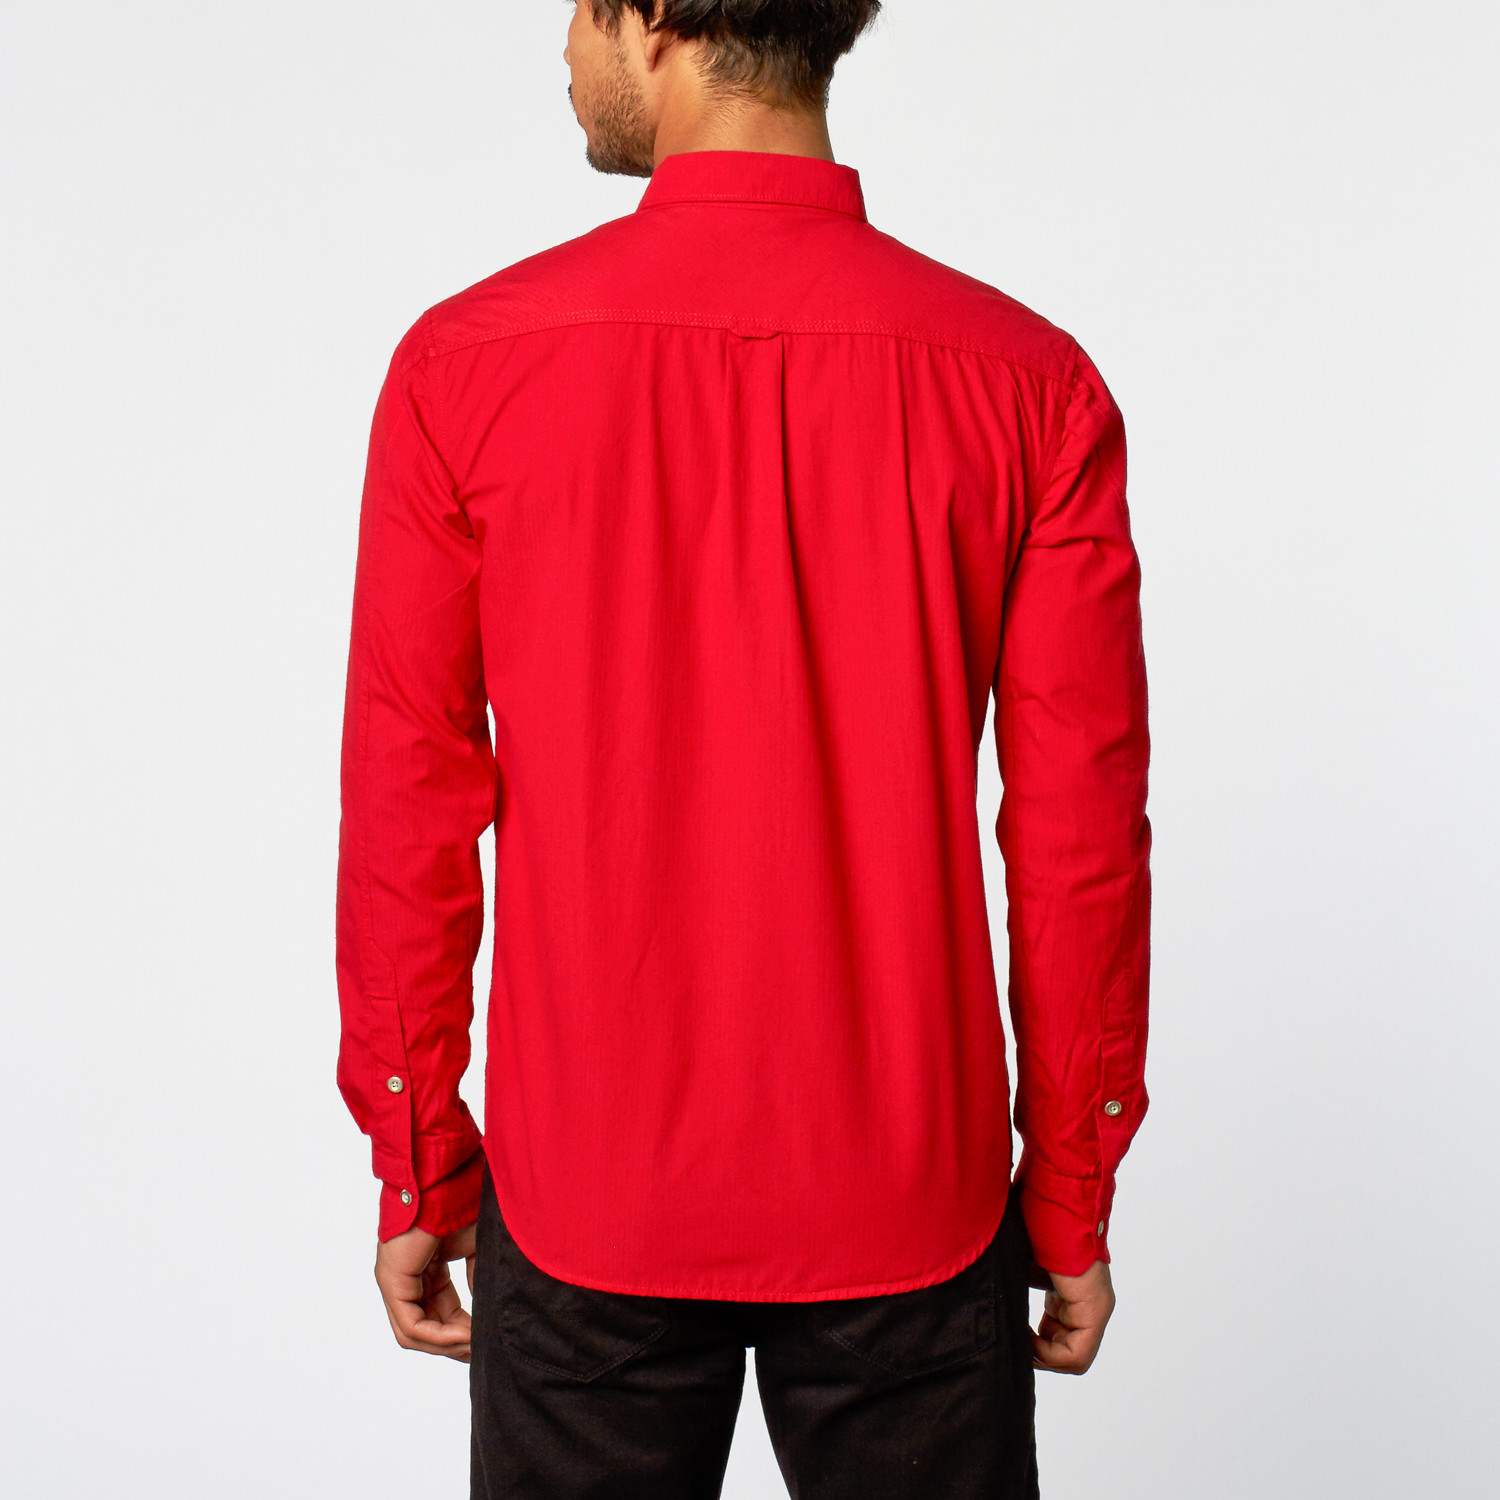 Blinder Woven Shirt // Neon Red (L) - Micros - Touch of Modern